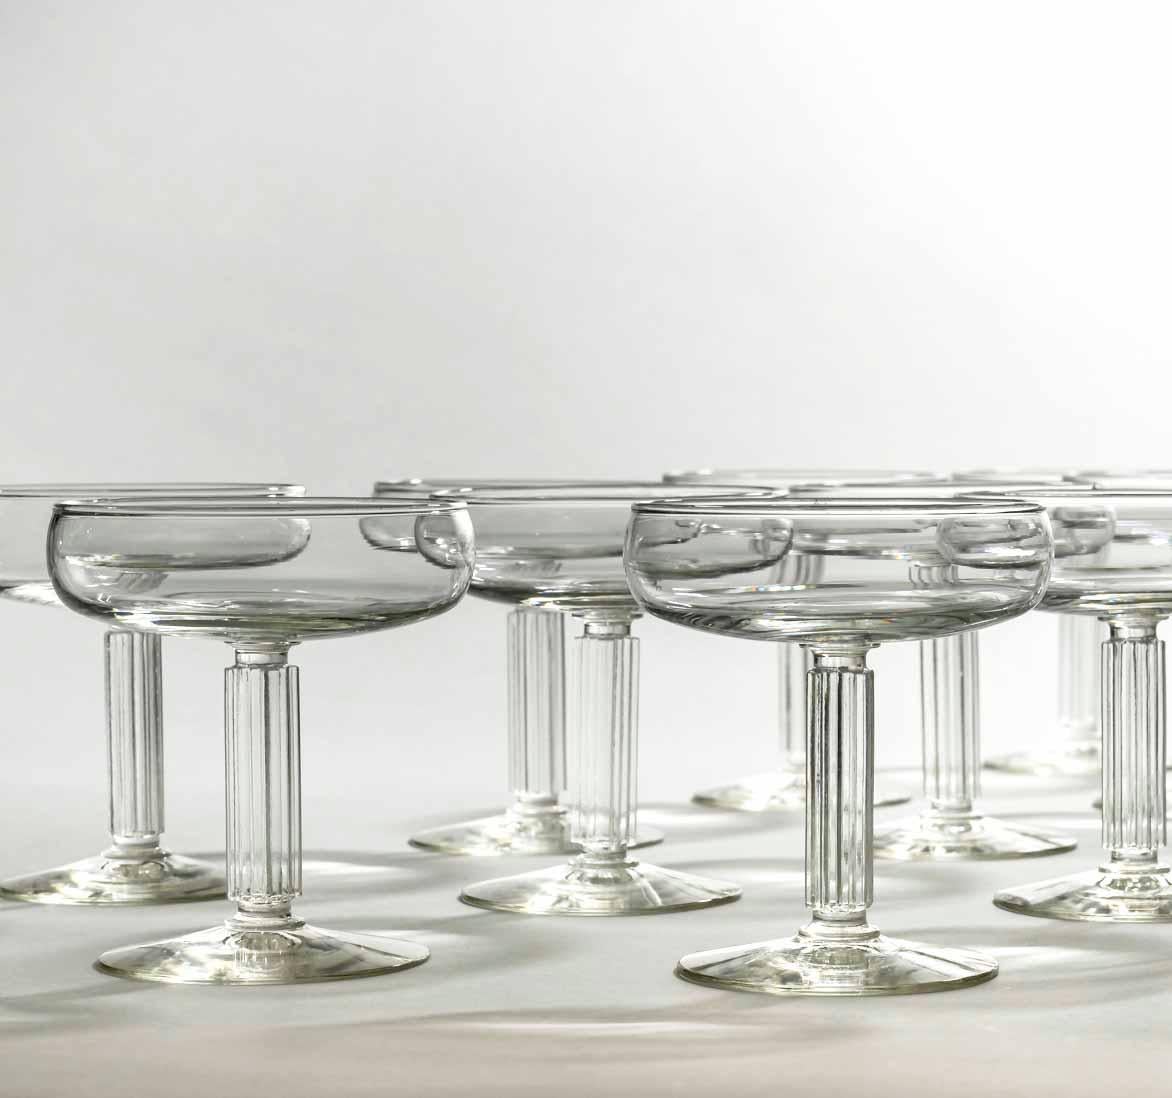 Art Deco Rare Set of 12 Coupes or Martini Glasses, Embassy Pattern, Teague for Libbey